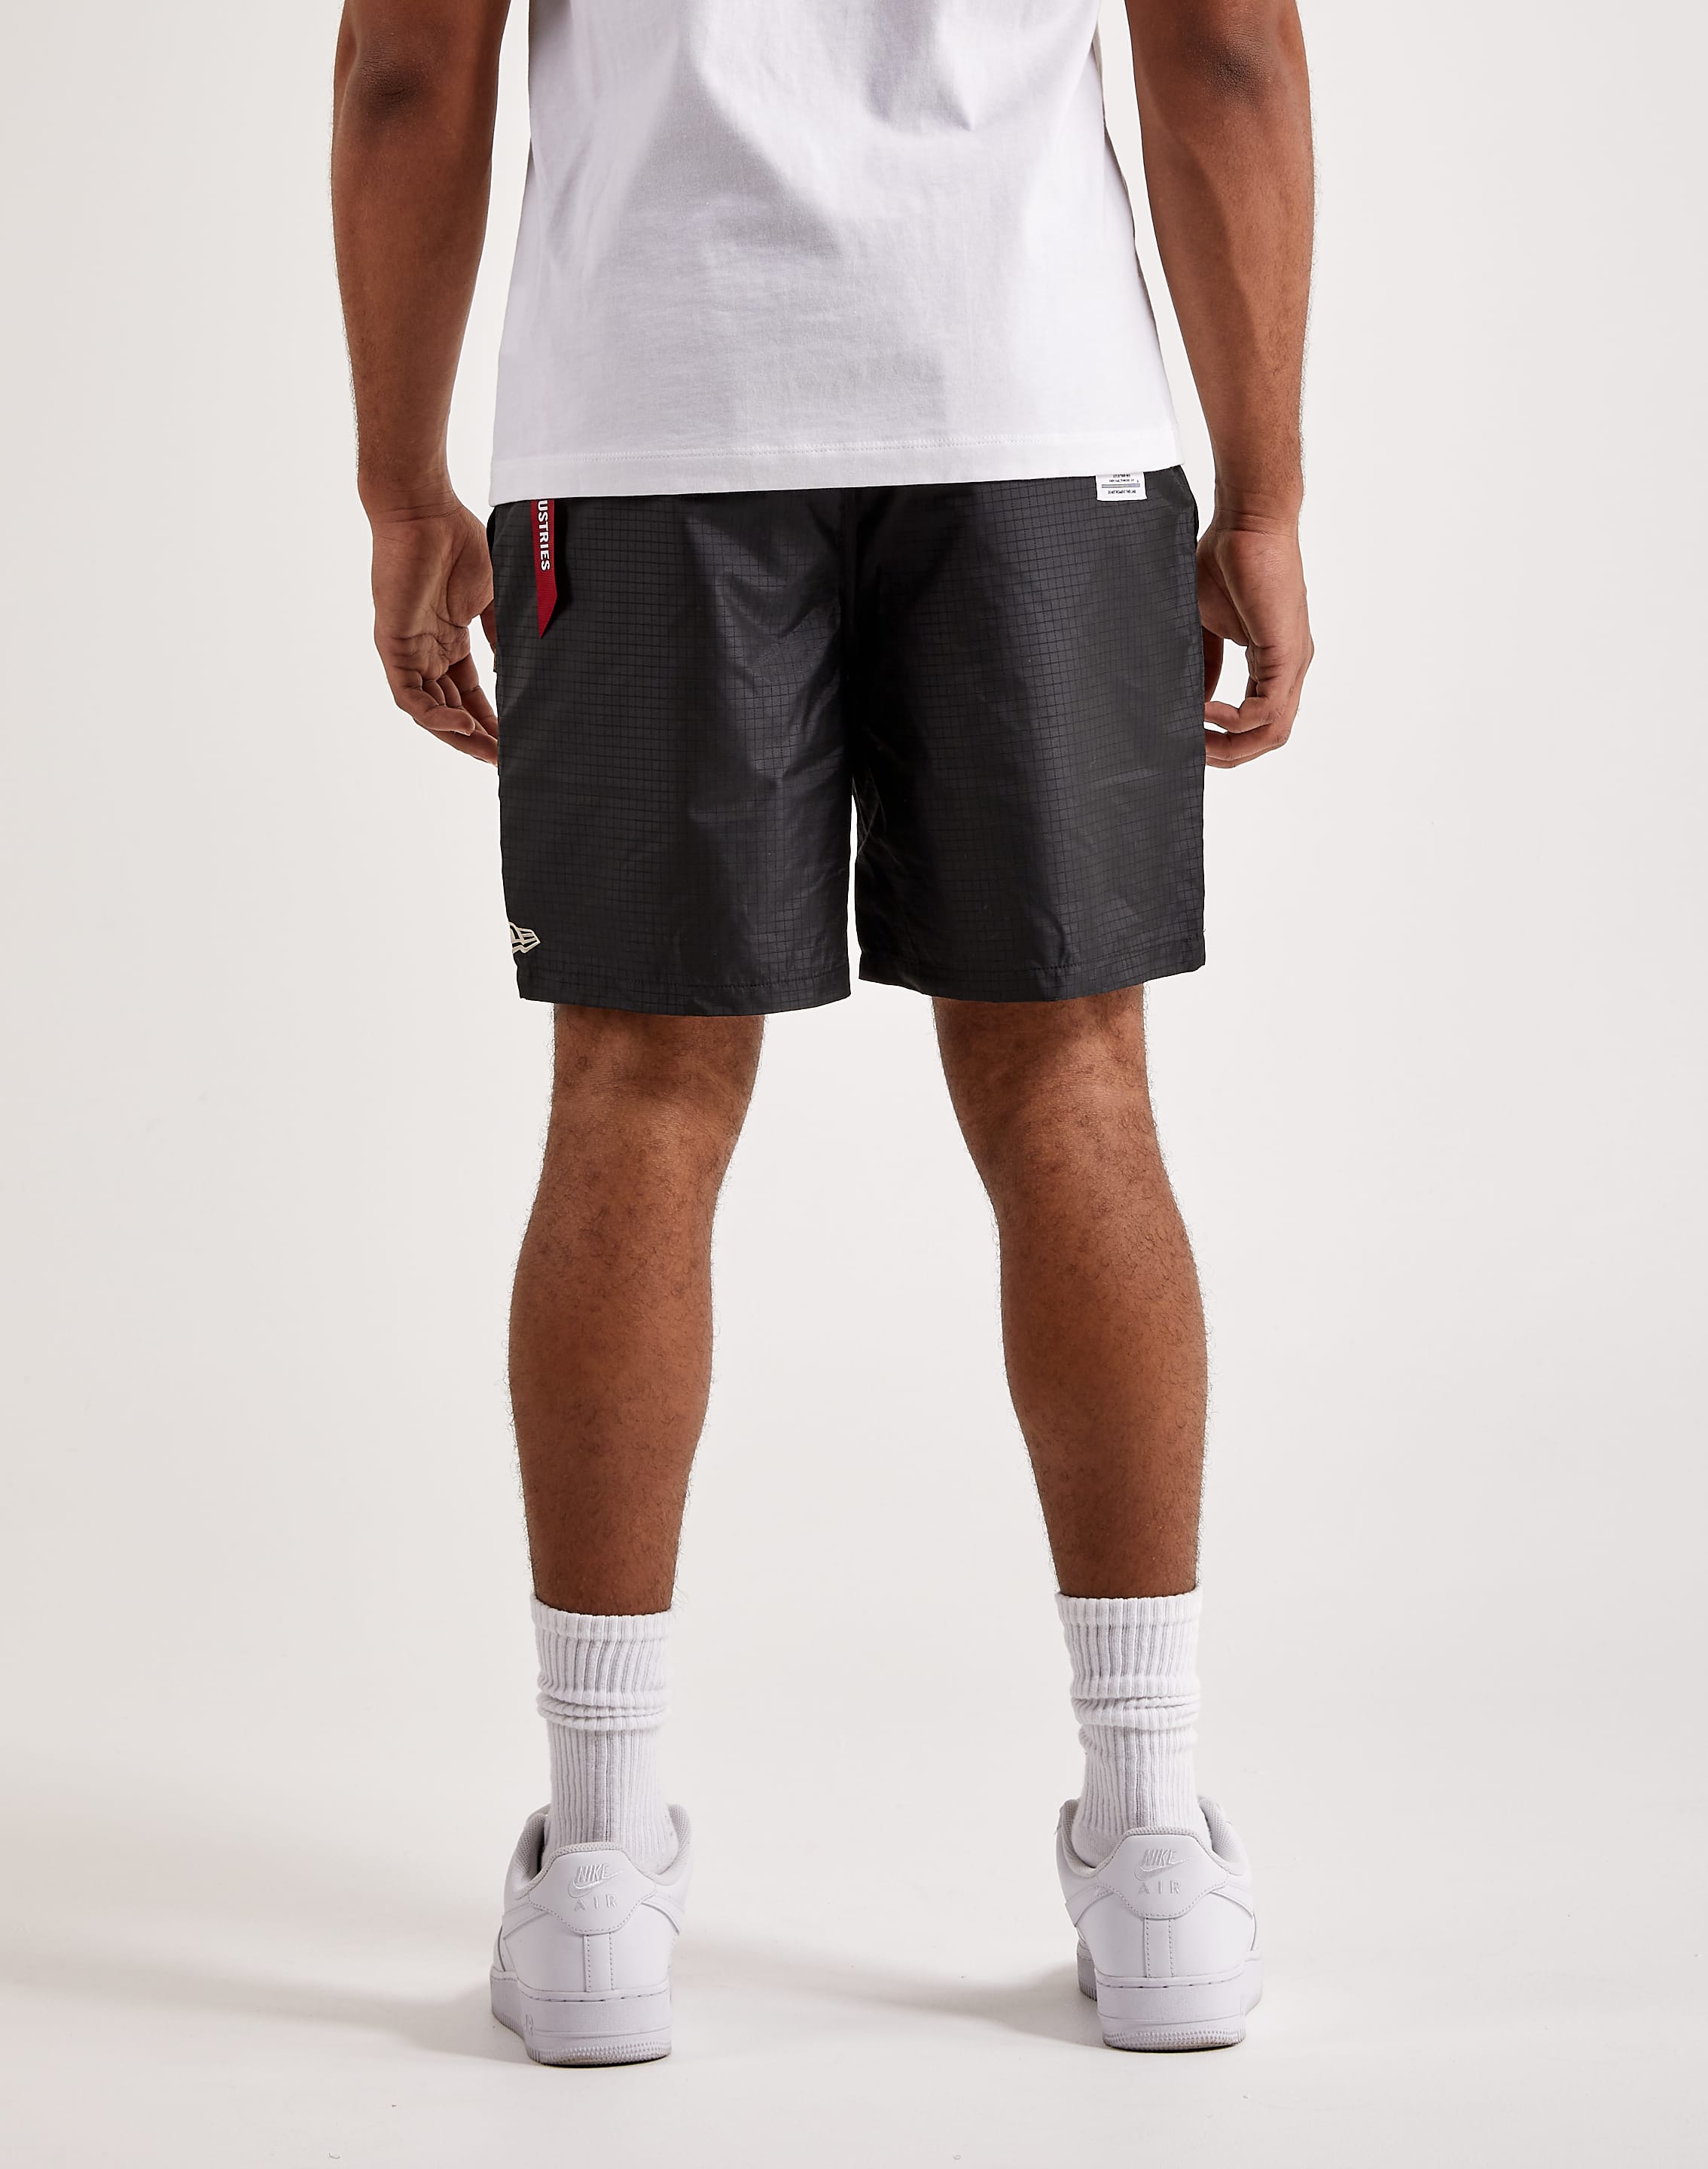 Alpha Industries Chicago White Sox Shorts – DTLR